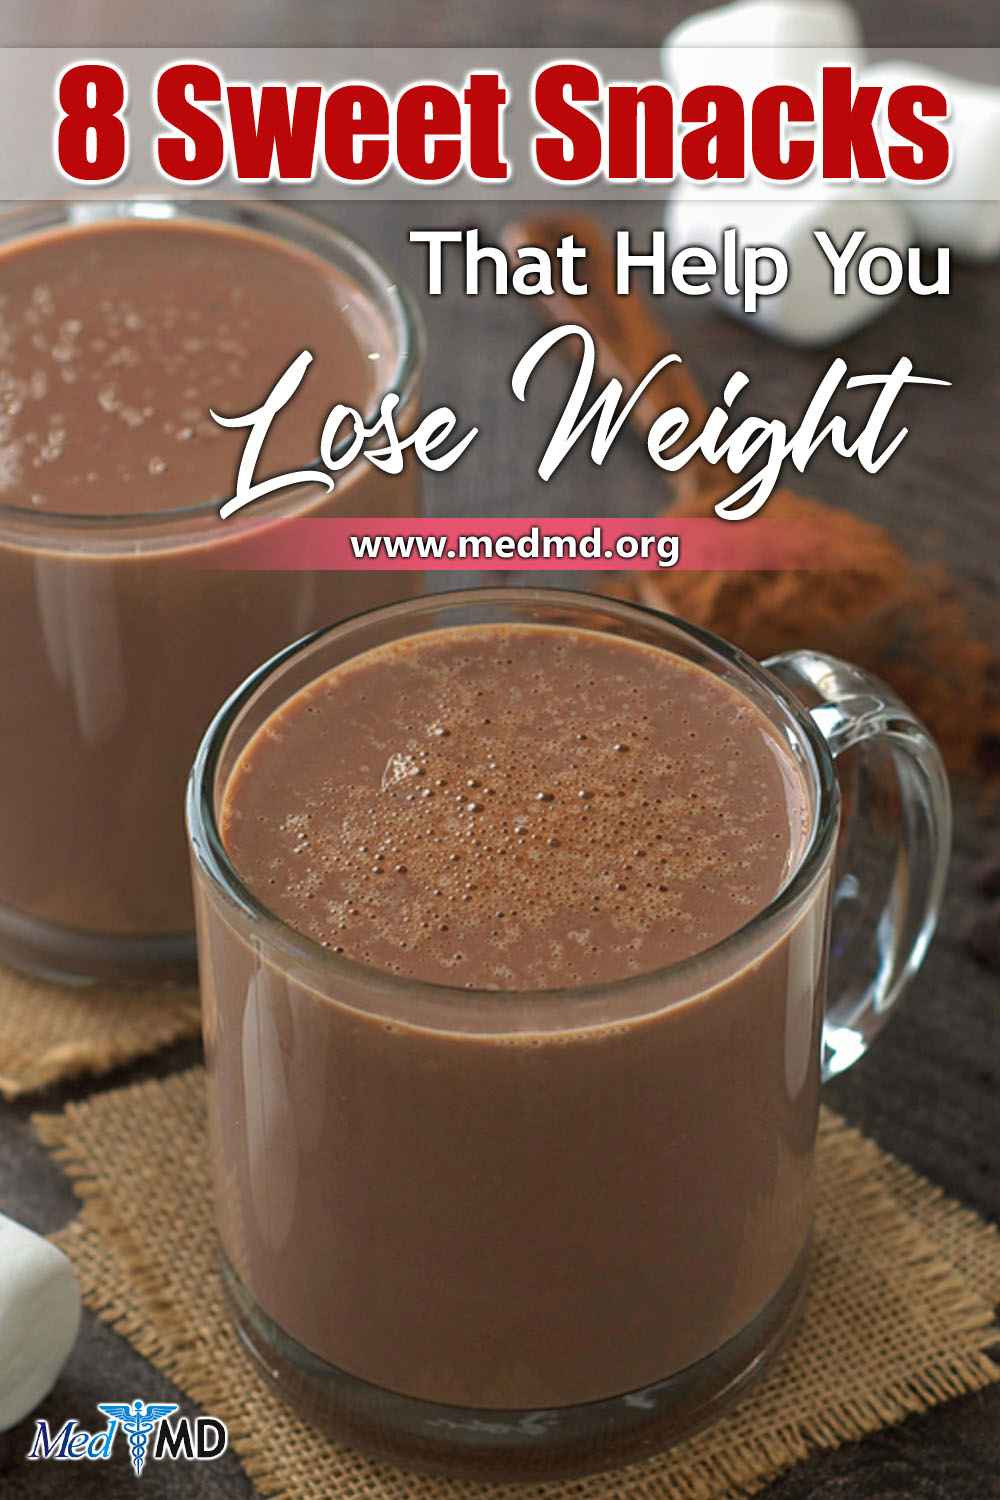 Healthy Sweet Snacks For Weight Loss
 8 Sweet Snacks That Help You Lose Weight